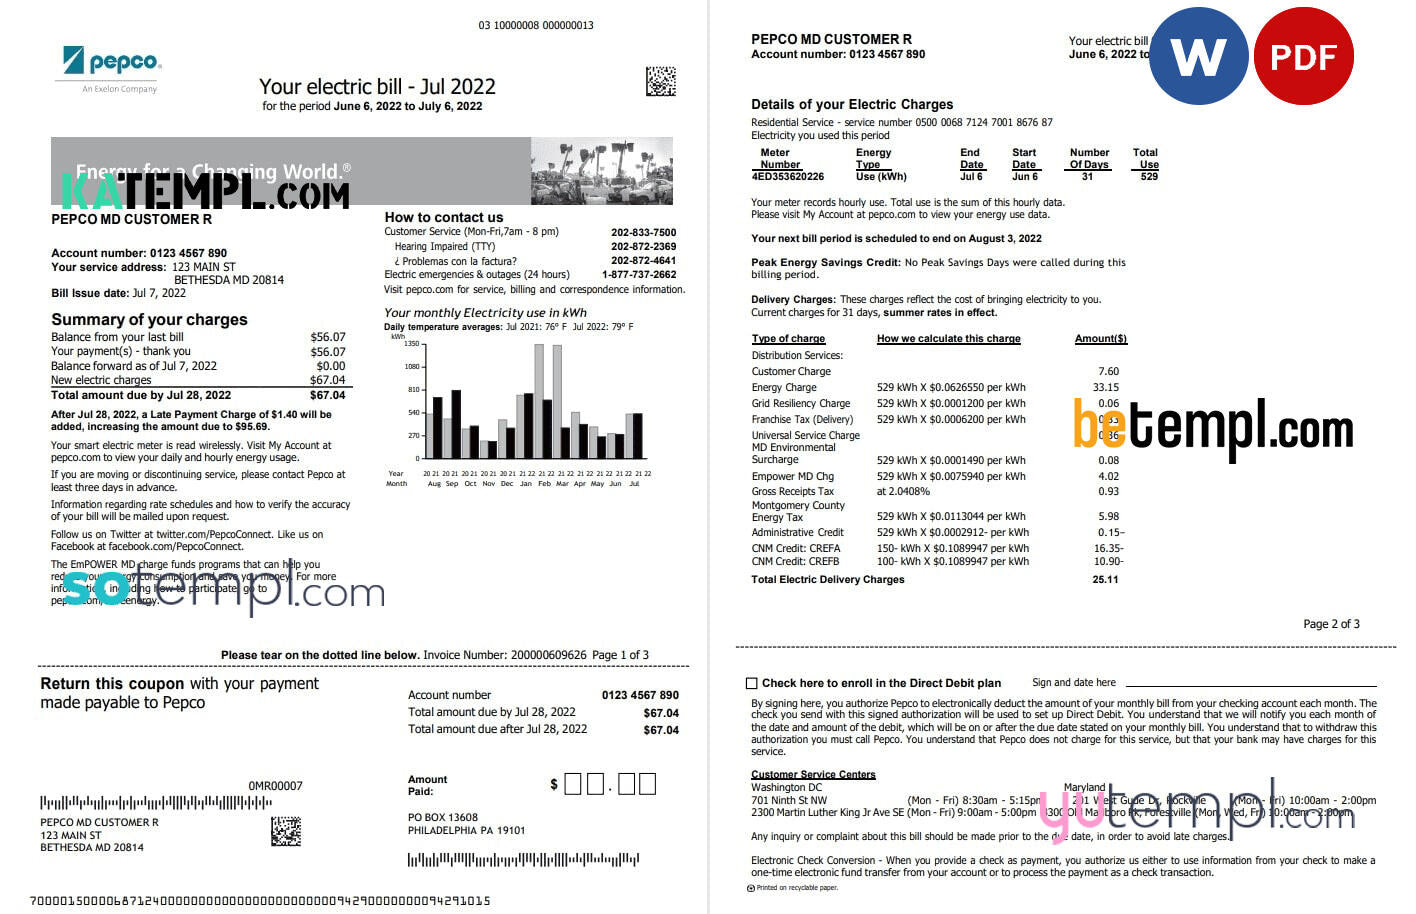 Usa Maryland Pepco Utility Bill Word And Pdf Template 3 Pages Katempl 0688